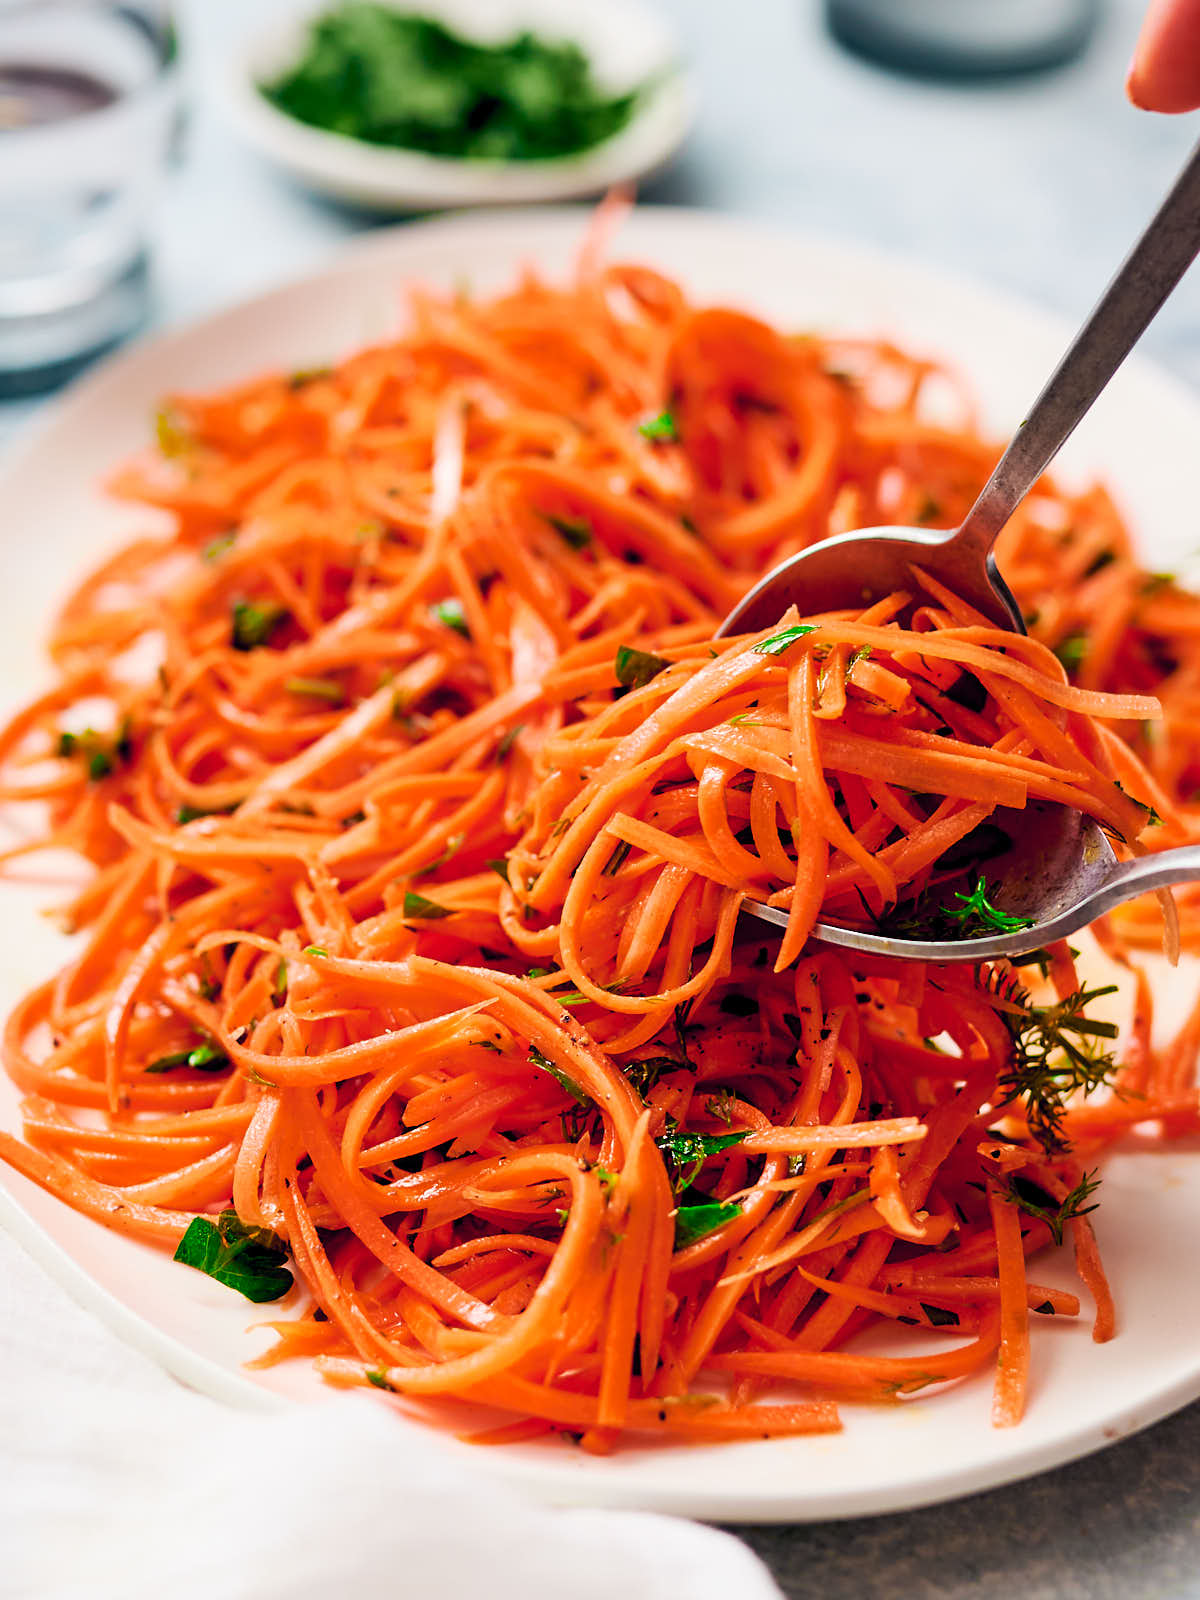 Raw carrot salad being served at the table.